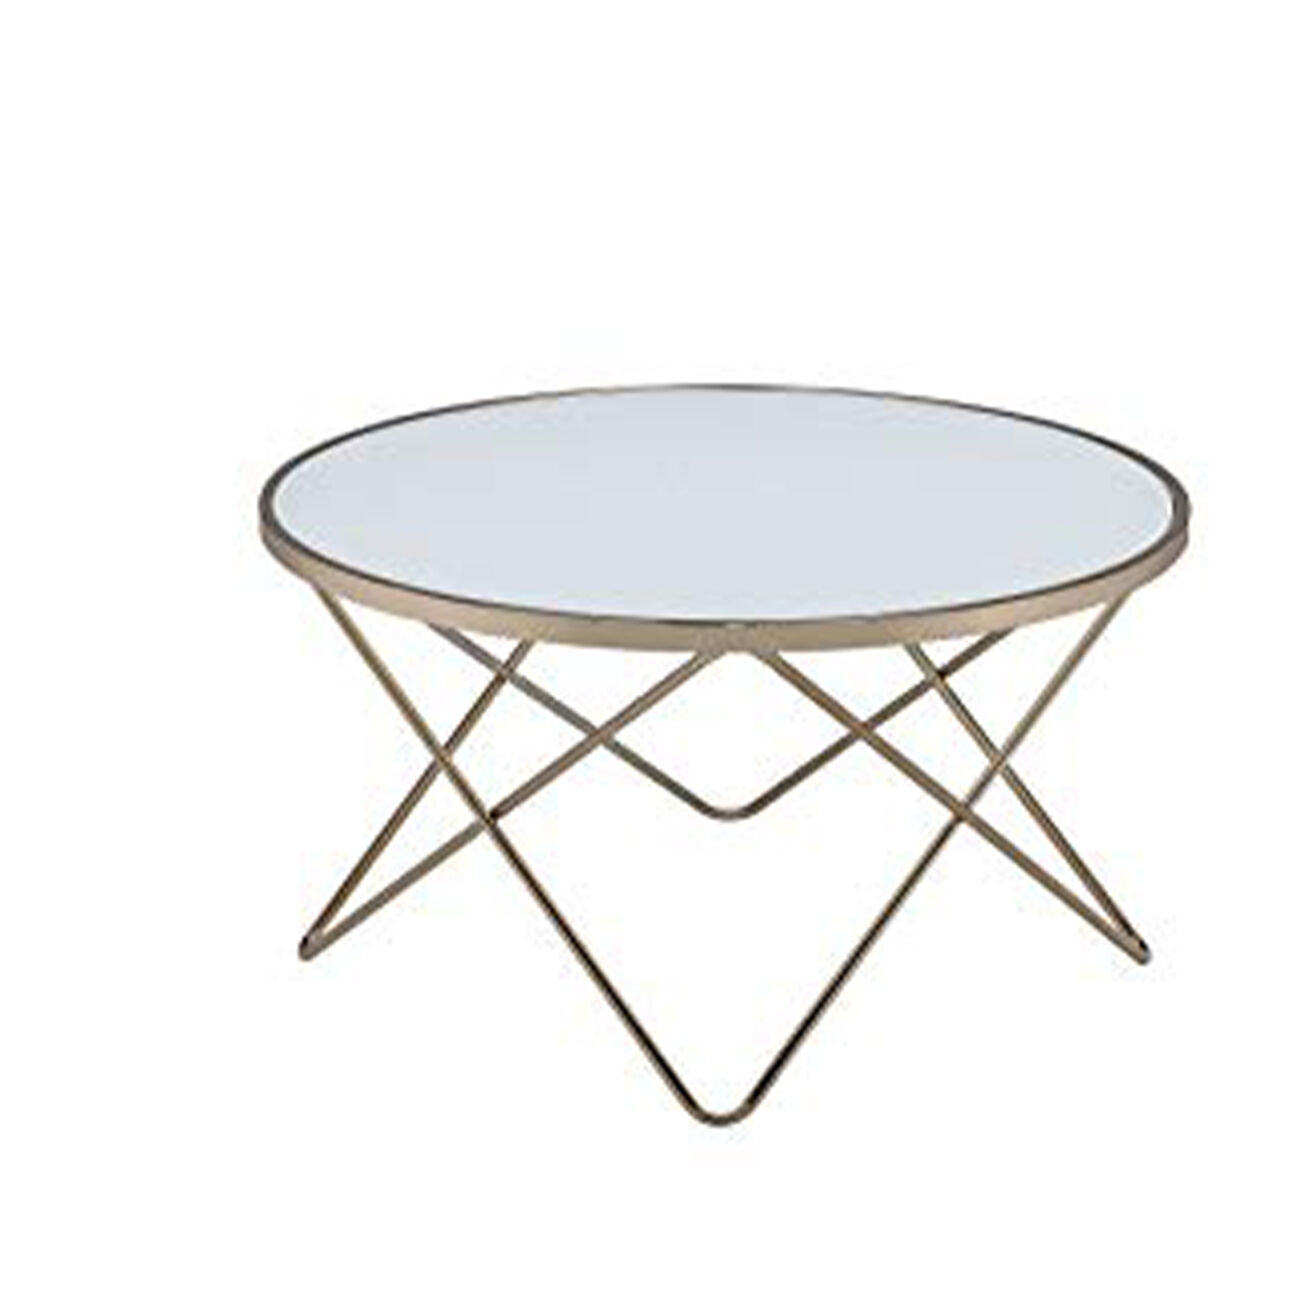 Contemporary Style Round Glass and Metal Coffee Table, White and Gold